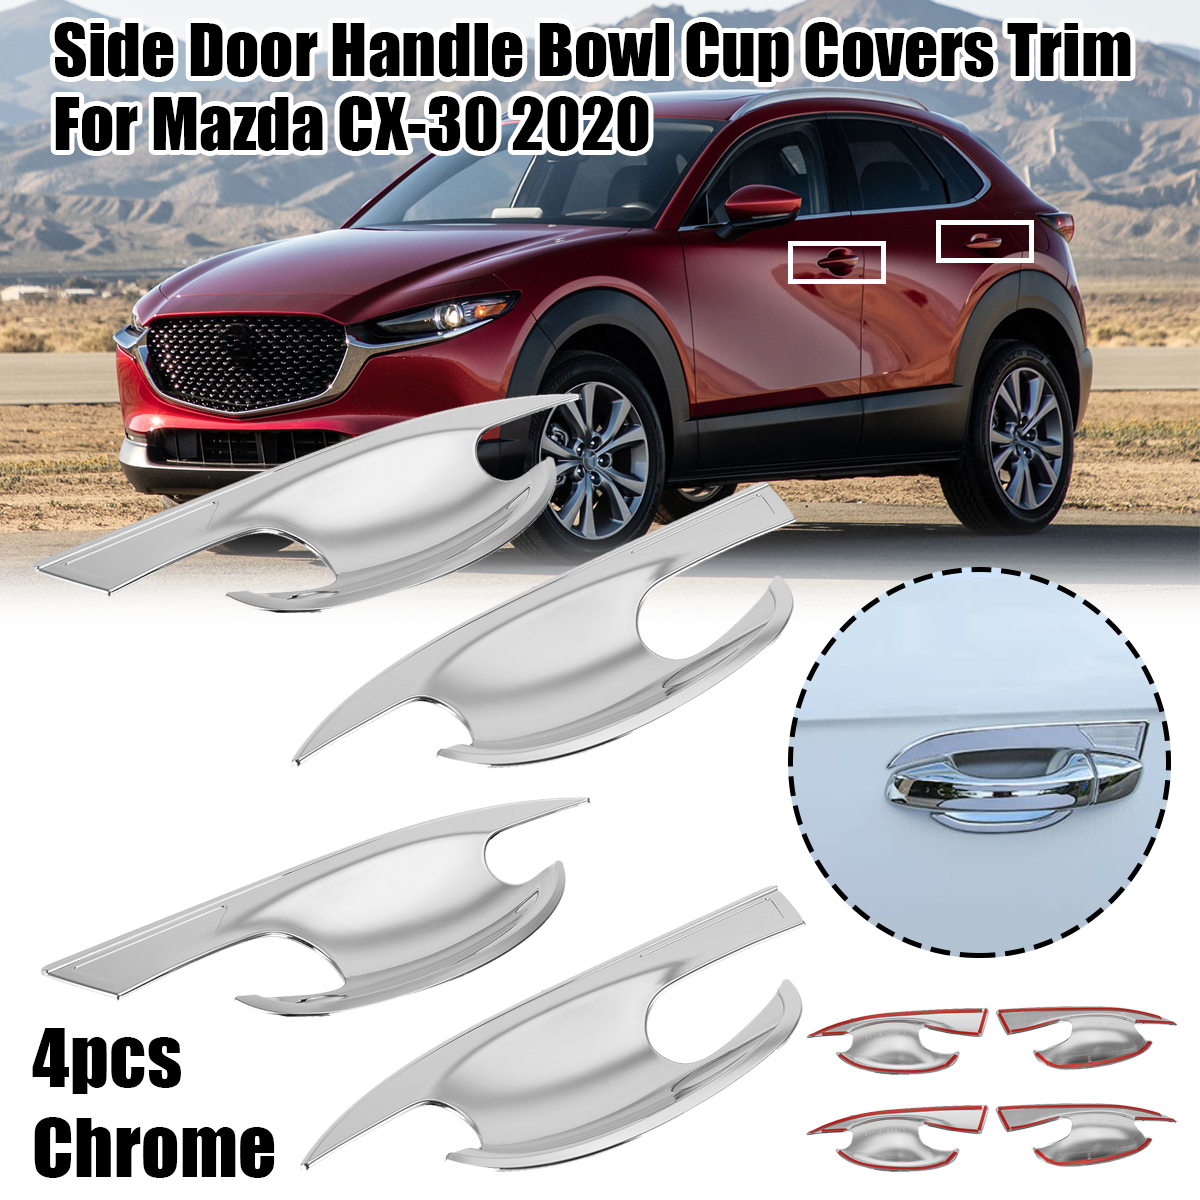 Chrome-Handle-Protective-Cover-Door-Handle-Outer-Bowls-Trim-For-Mazda-CX-30-2020-1751667-18